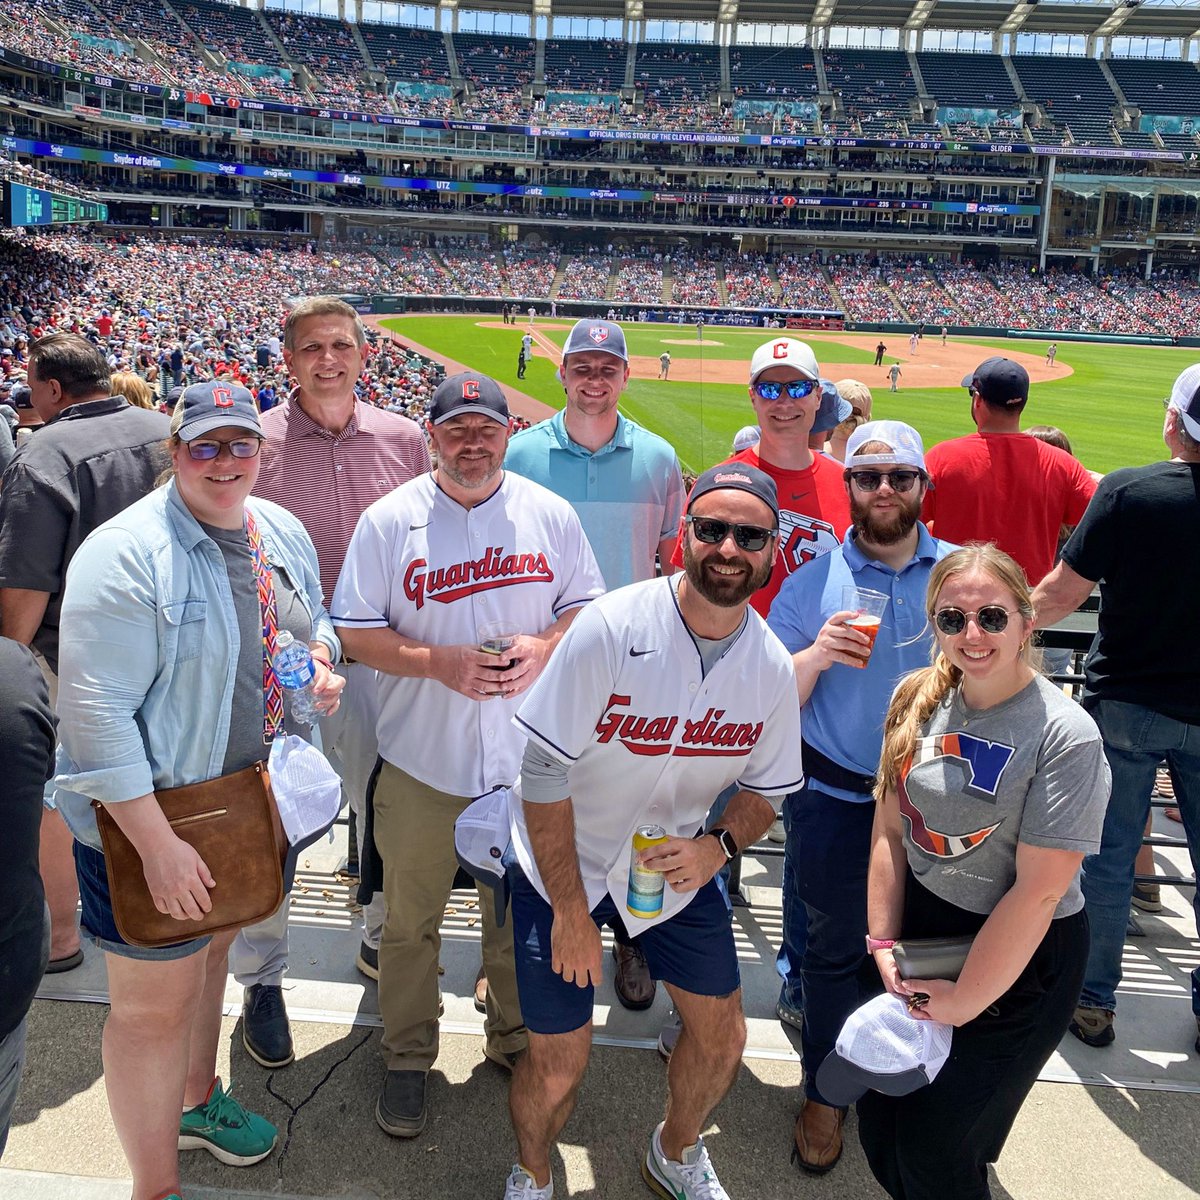 Last week’s baseball game was a home run for our Cleveland Design Center Group Outing! On June 22, our team attended the Cleveland Guardians and Oakland Athletics baseball game at Progressive Field. The Guardians won 6-1! https://t.co/XyBjM34XGL